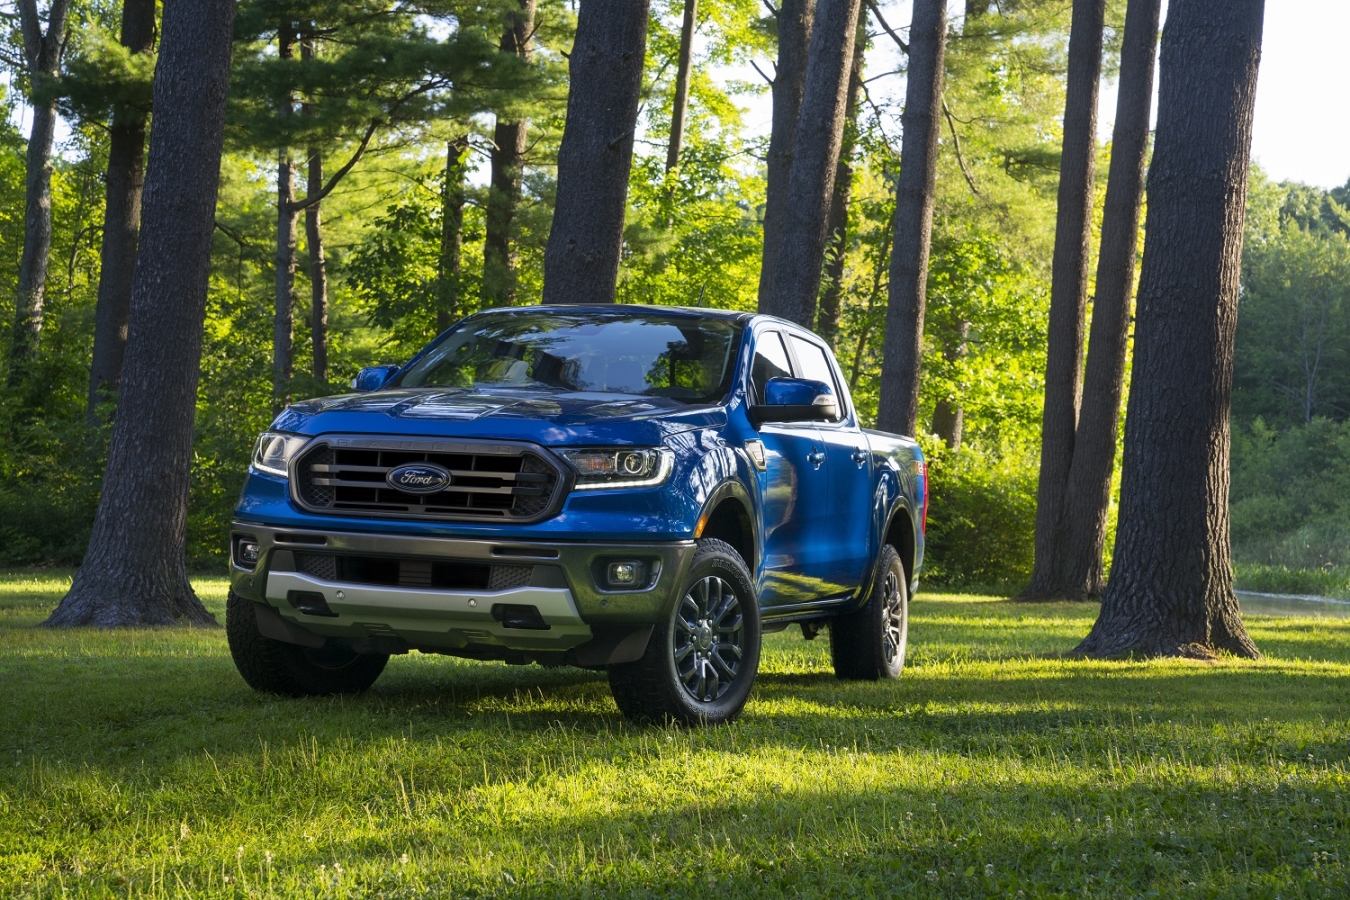 2020 Ford Ranger Among Most Reliable Used Pickup Trucks